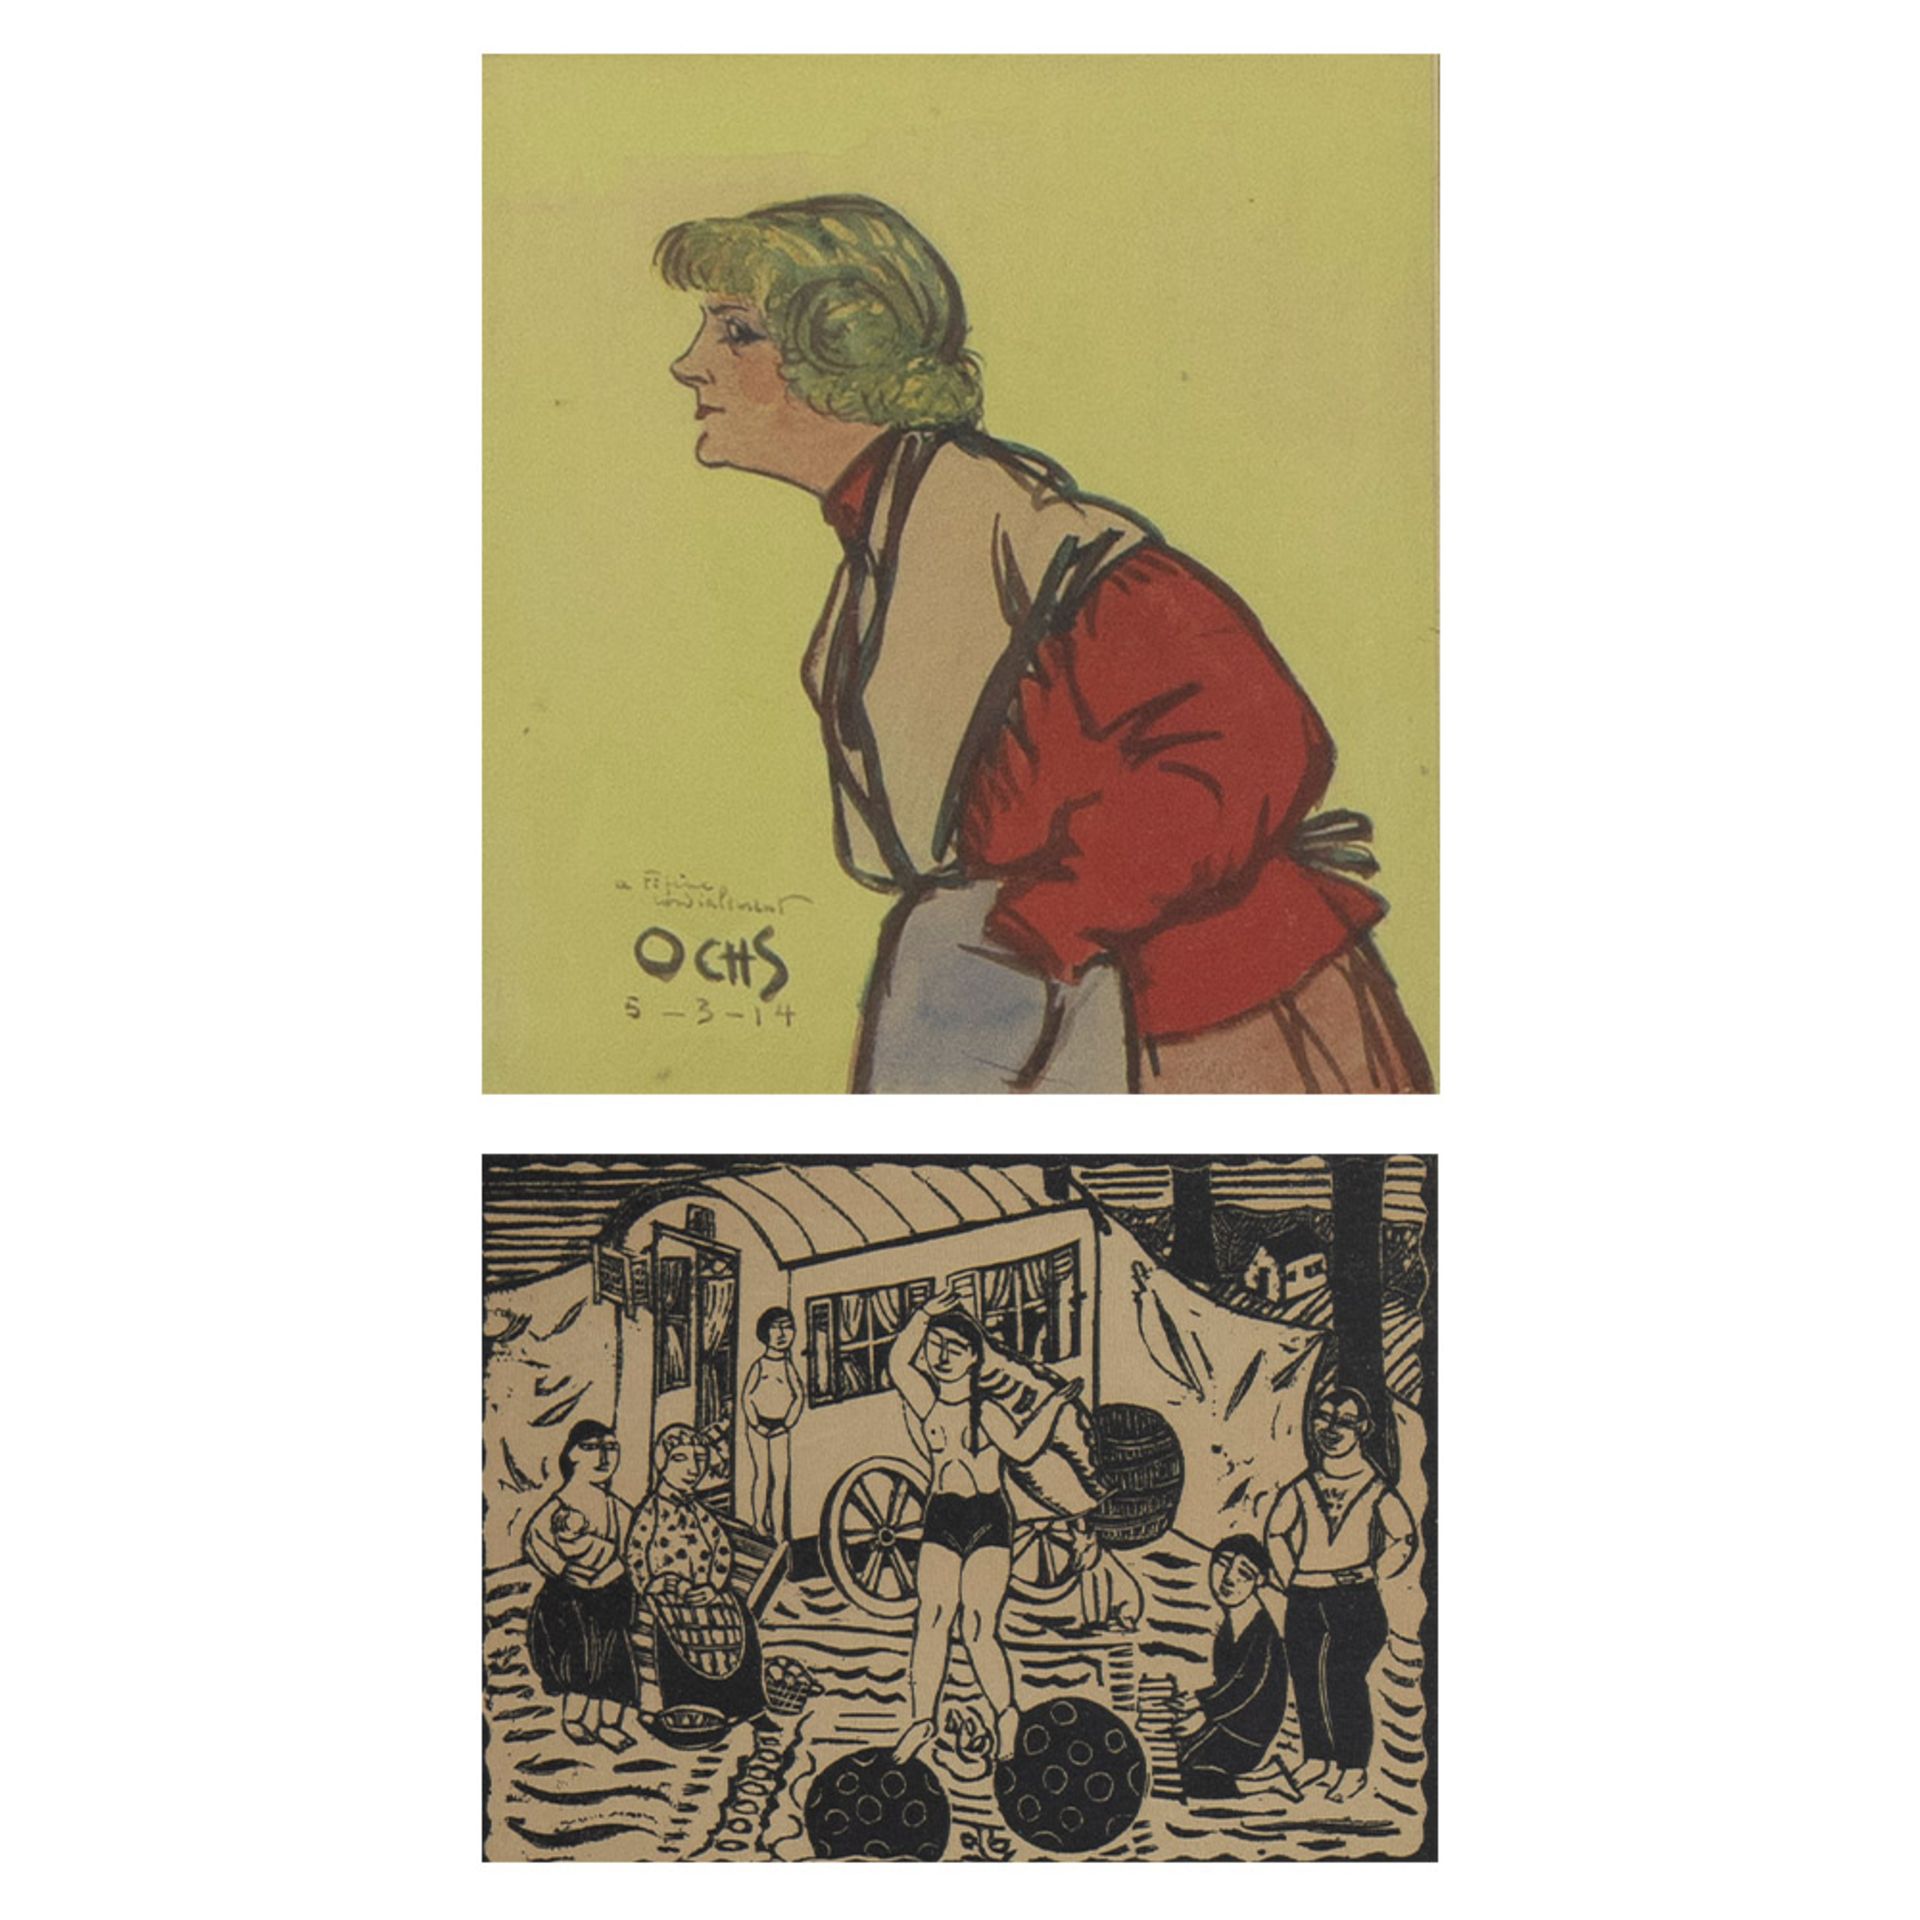 Edgard TYTGAT (1879-1957), woodcut La fortune de la roulotte, numbered 272/450 and signed in the pla